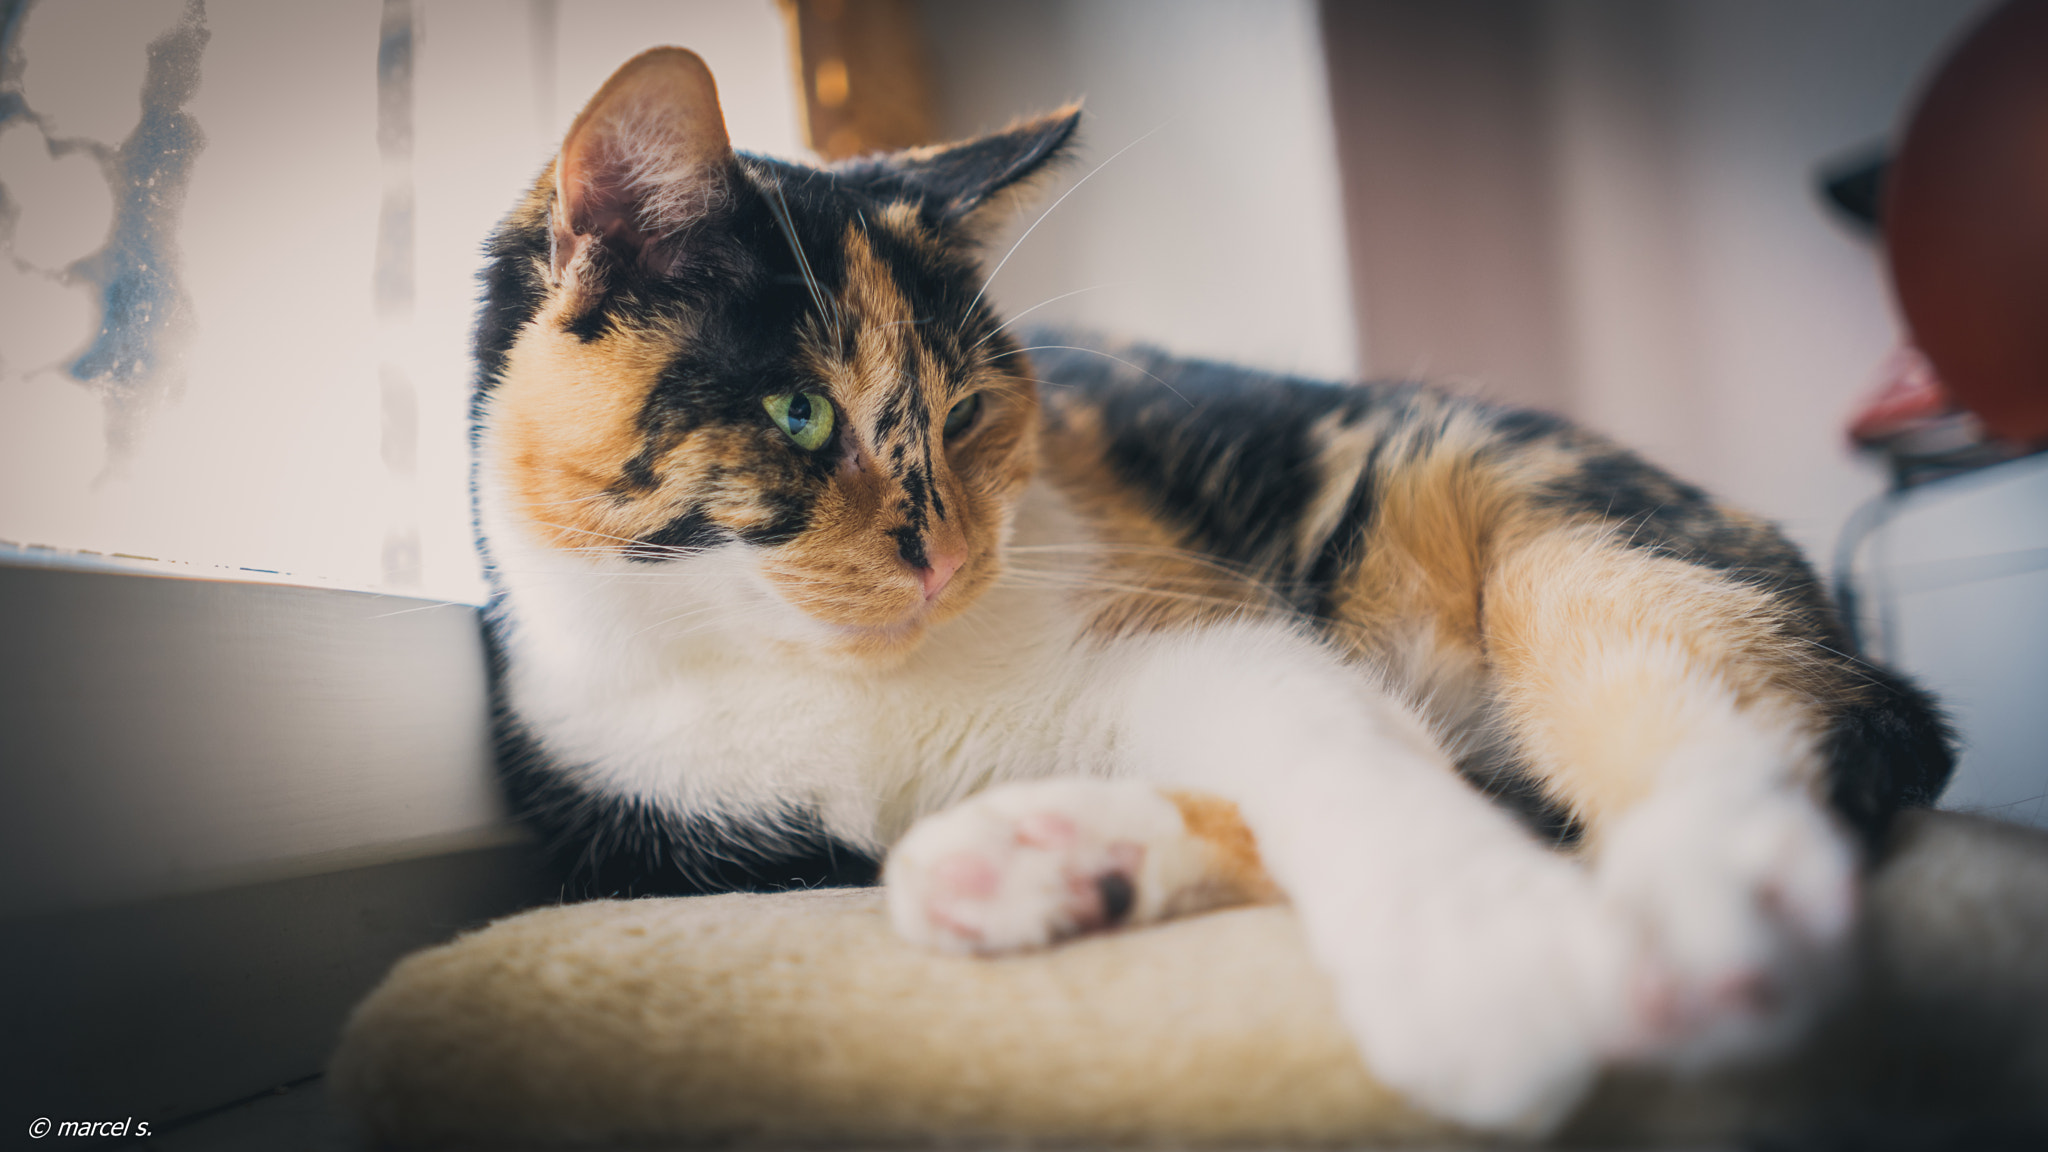 Sony a7 sample photo. Cat at home on its favorit place photography